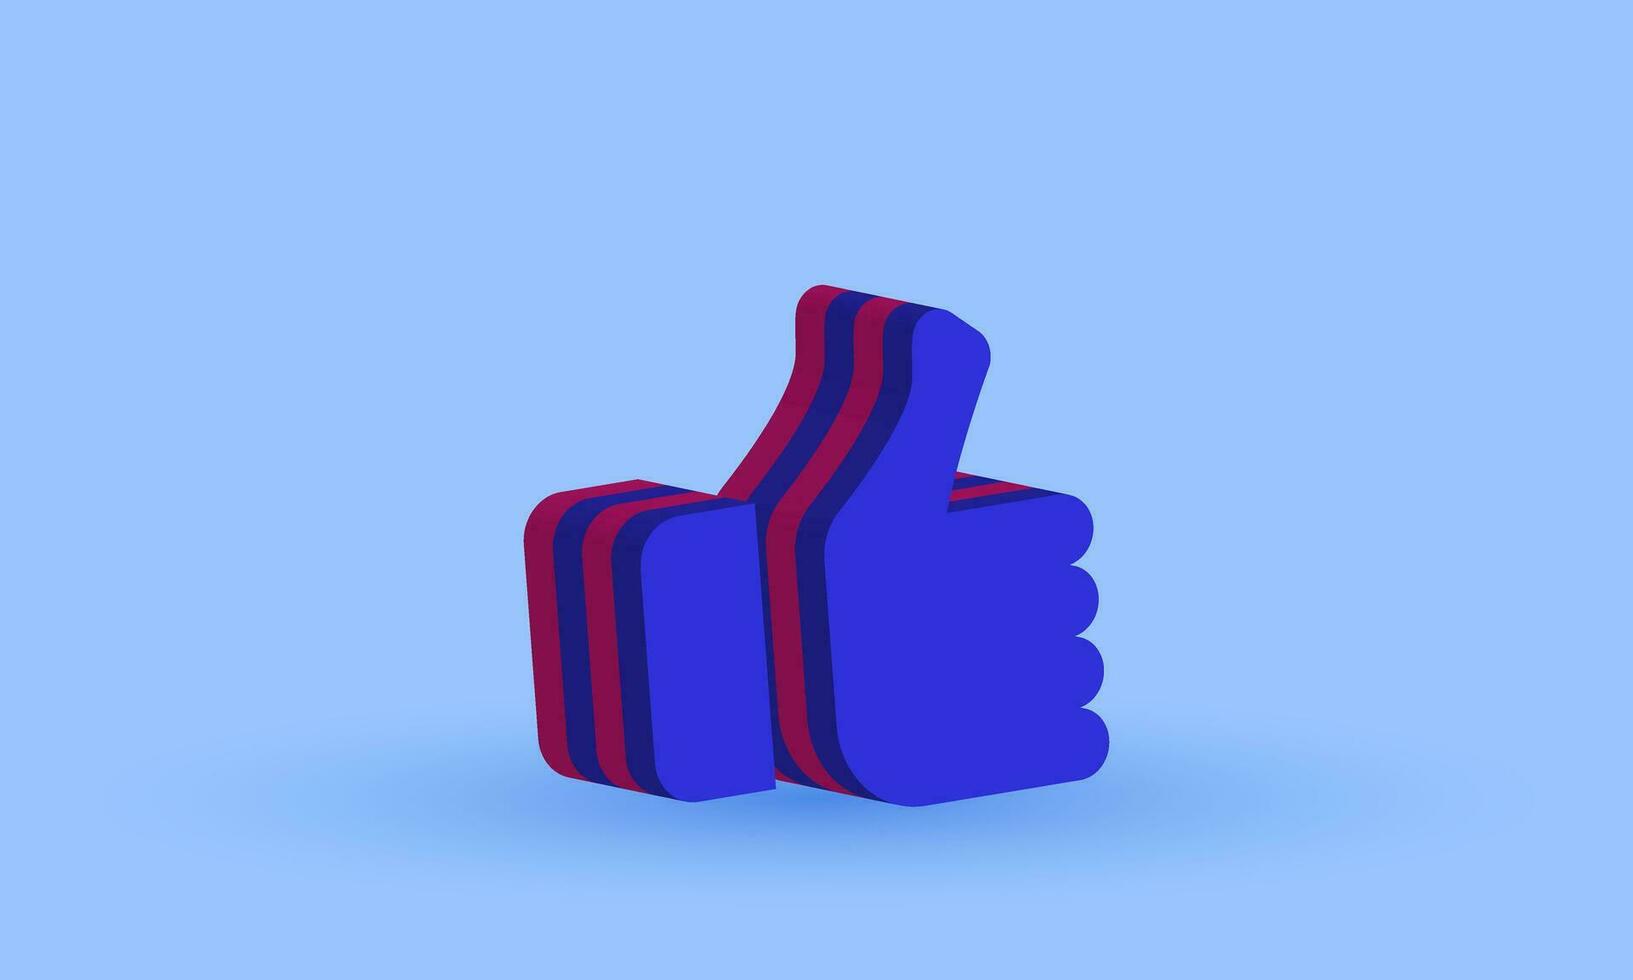 unique 3d style like success good feedback thumbs icon trendy symbols isolated on background vector